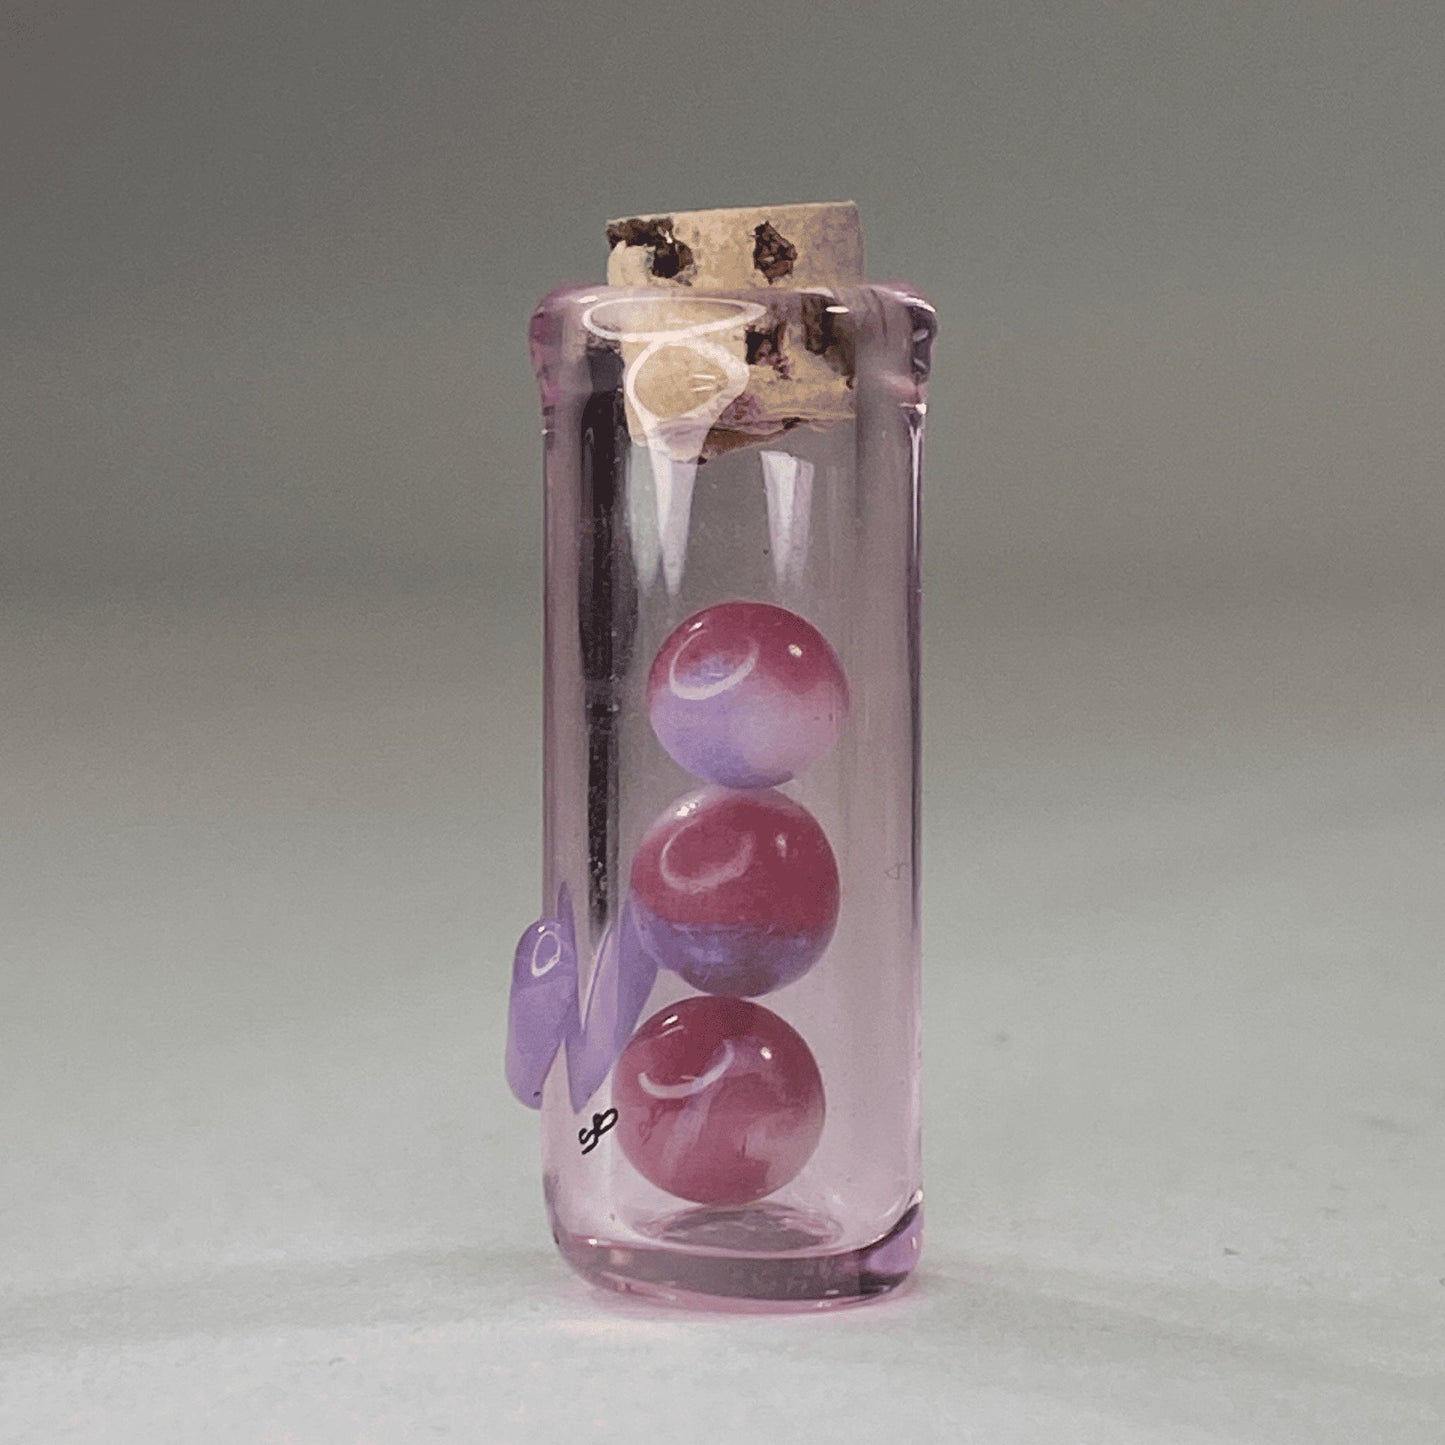 luxurious art piece - Meow Mix Terp Pearls (Set of 3) by Sakibomb